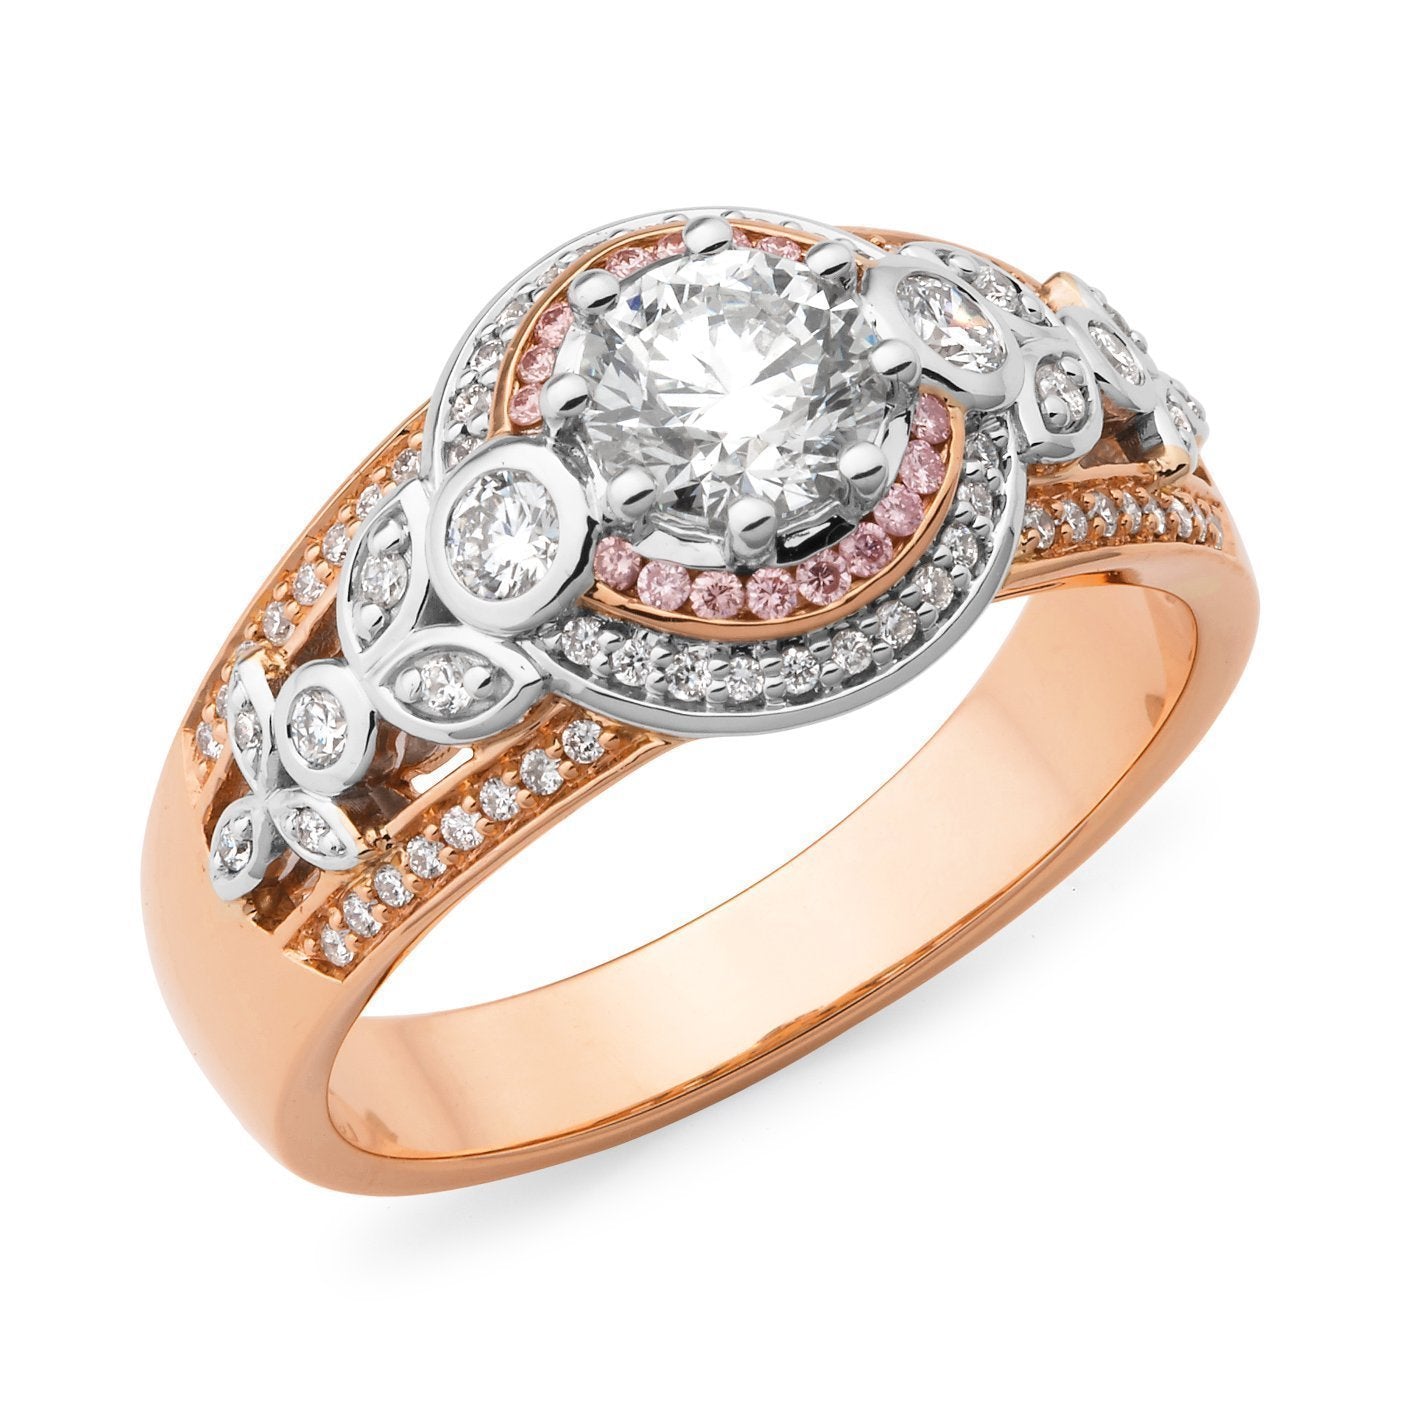 PINK CAVIAR 1.09ct White Round Brilliant & Pink Diamond Engagement Ring in 9ct Rose Gold